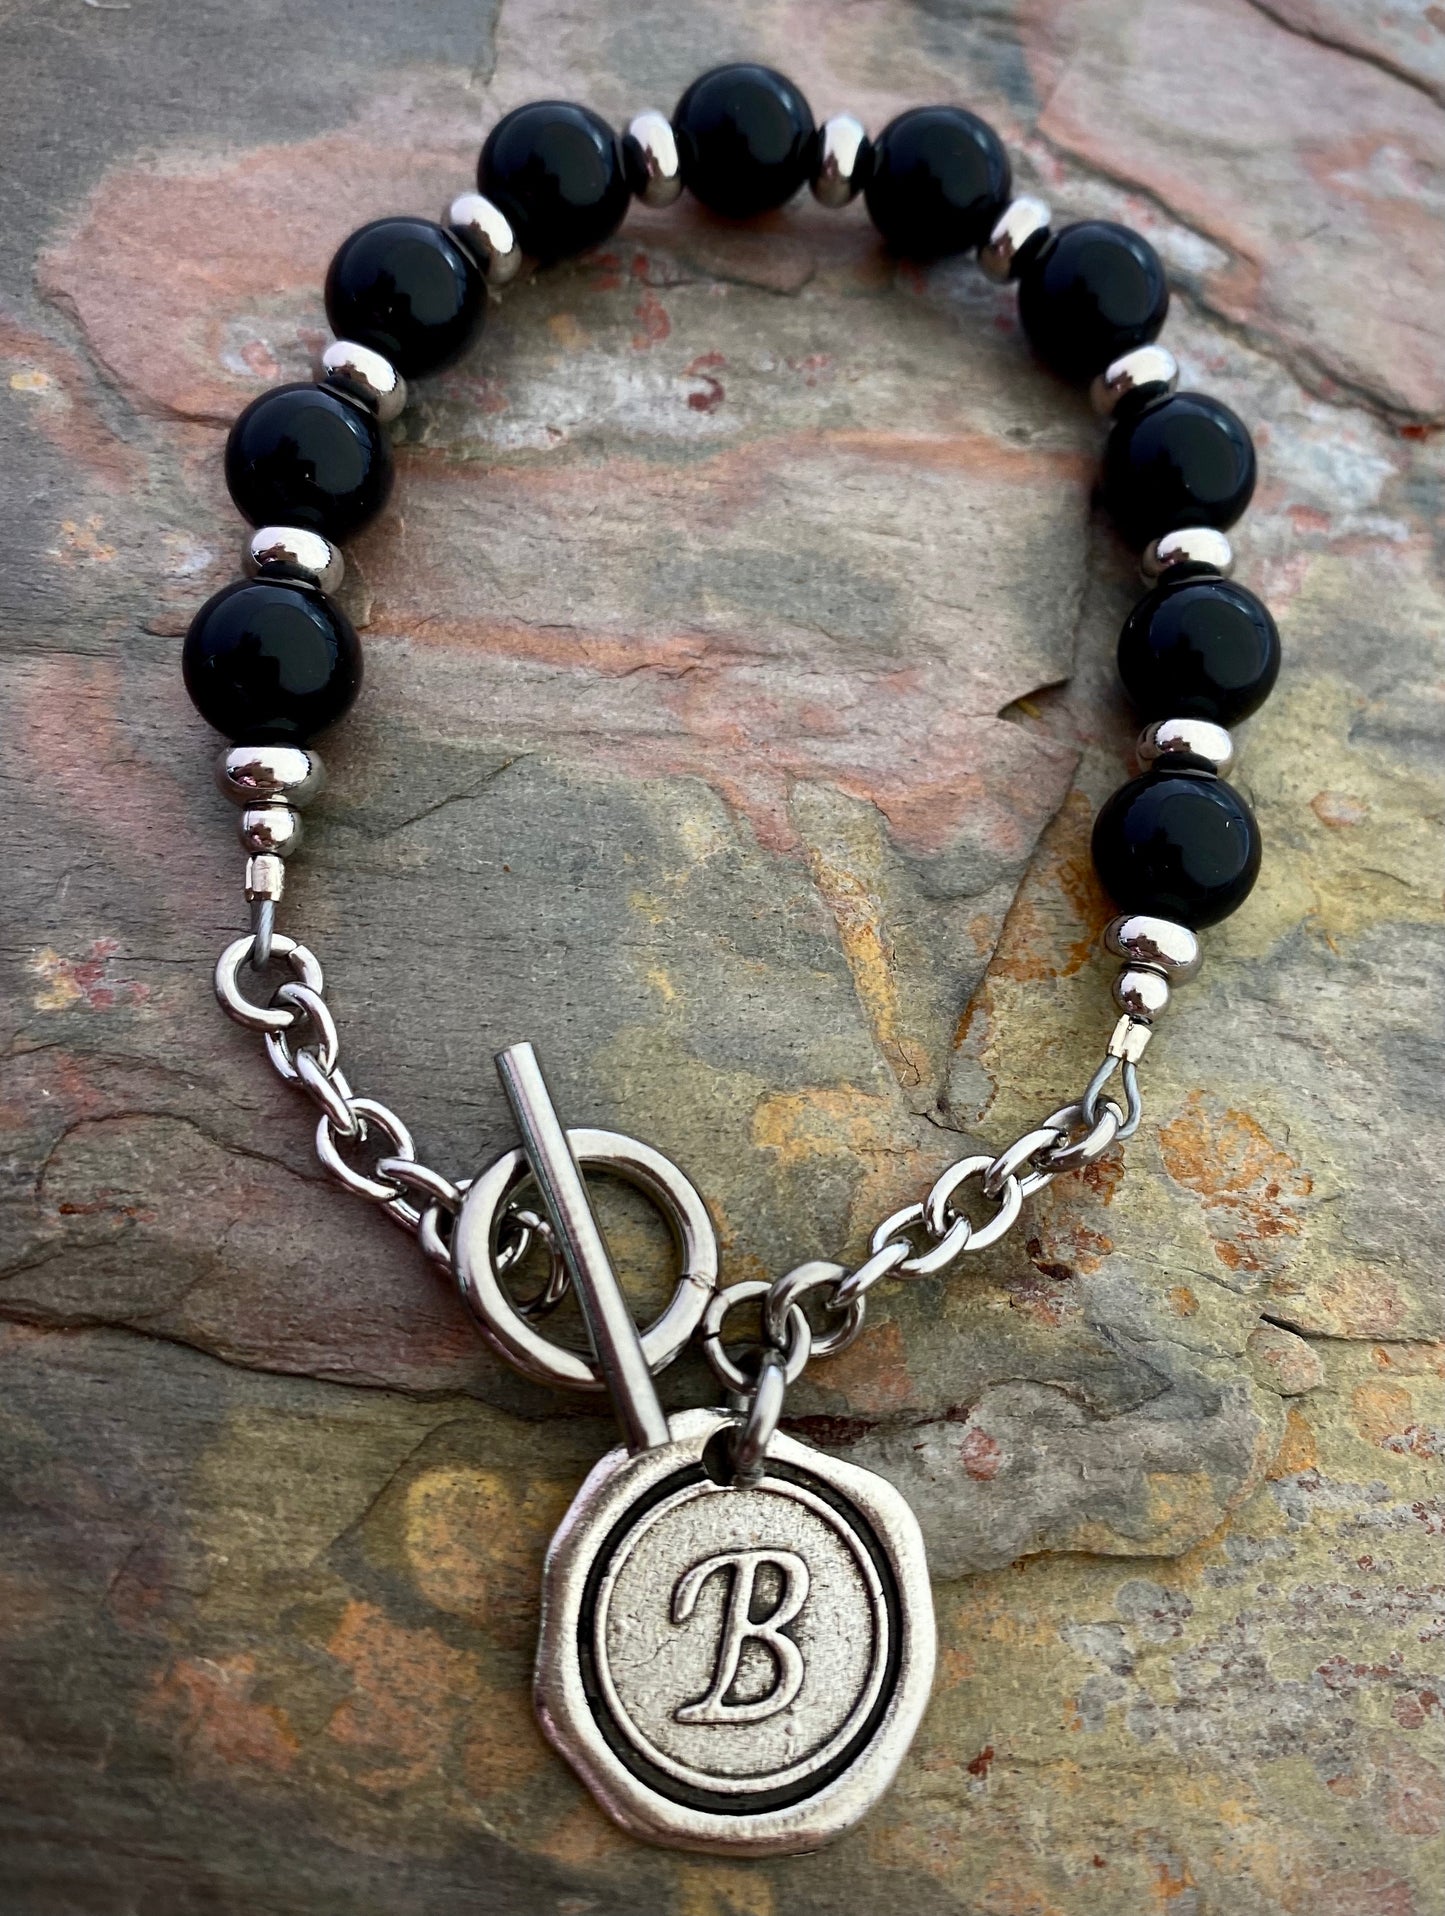 Beaded Stone Bracelet with letter charm (choice of stone and letter or option for photo)